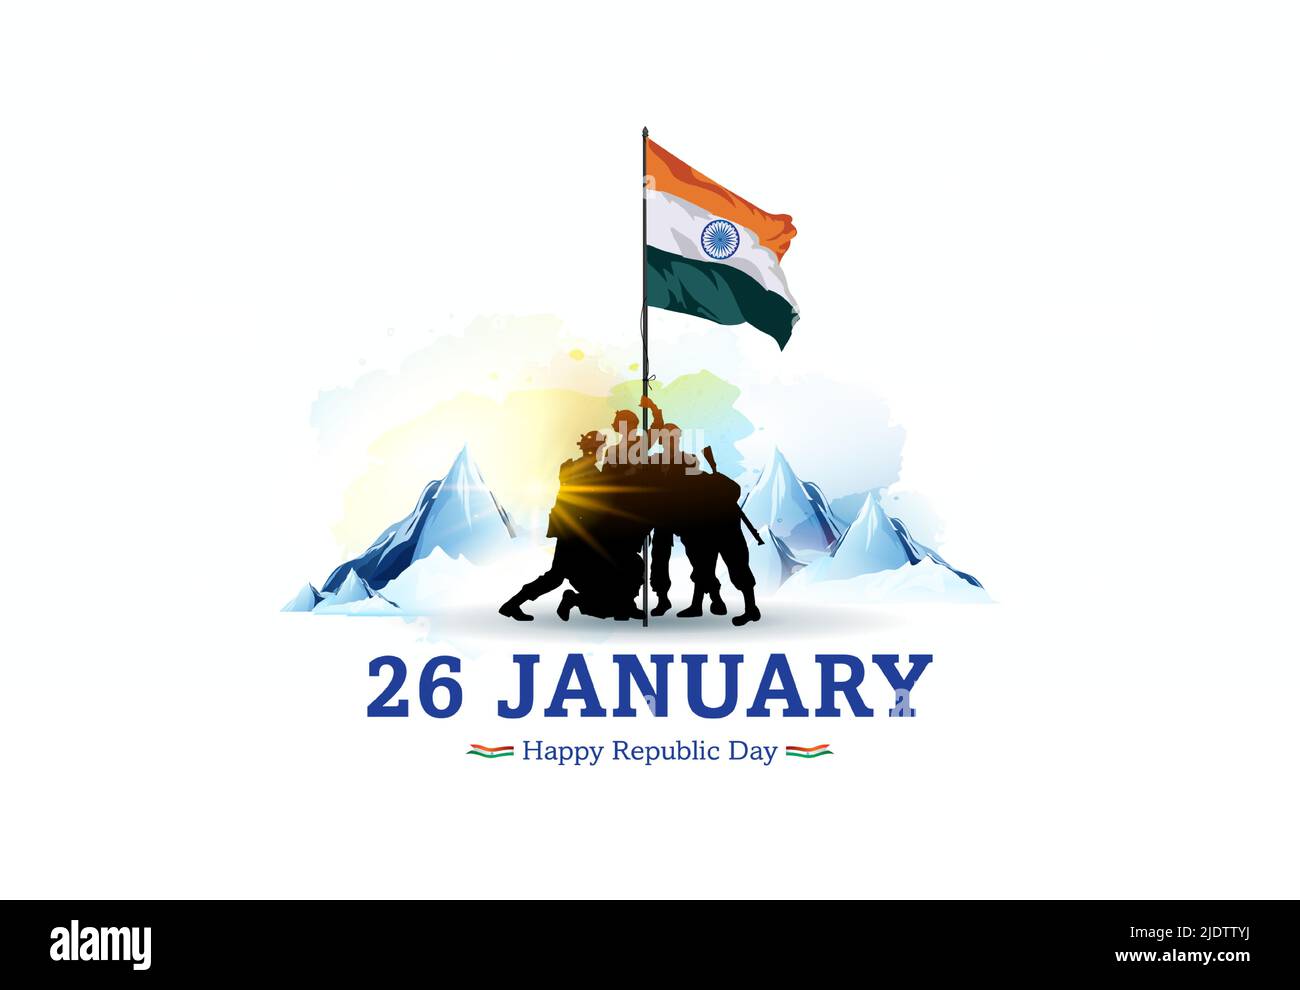 Indian freedom fighters Cut Out Stock Images & Pictures - Alamy